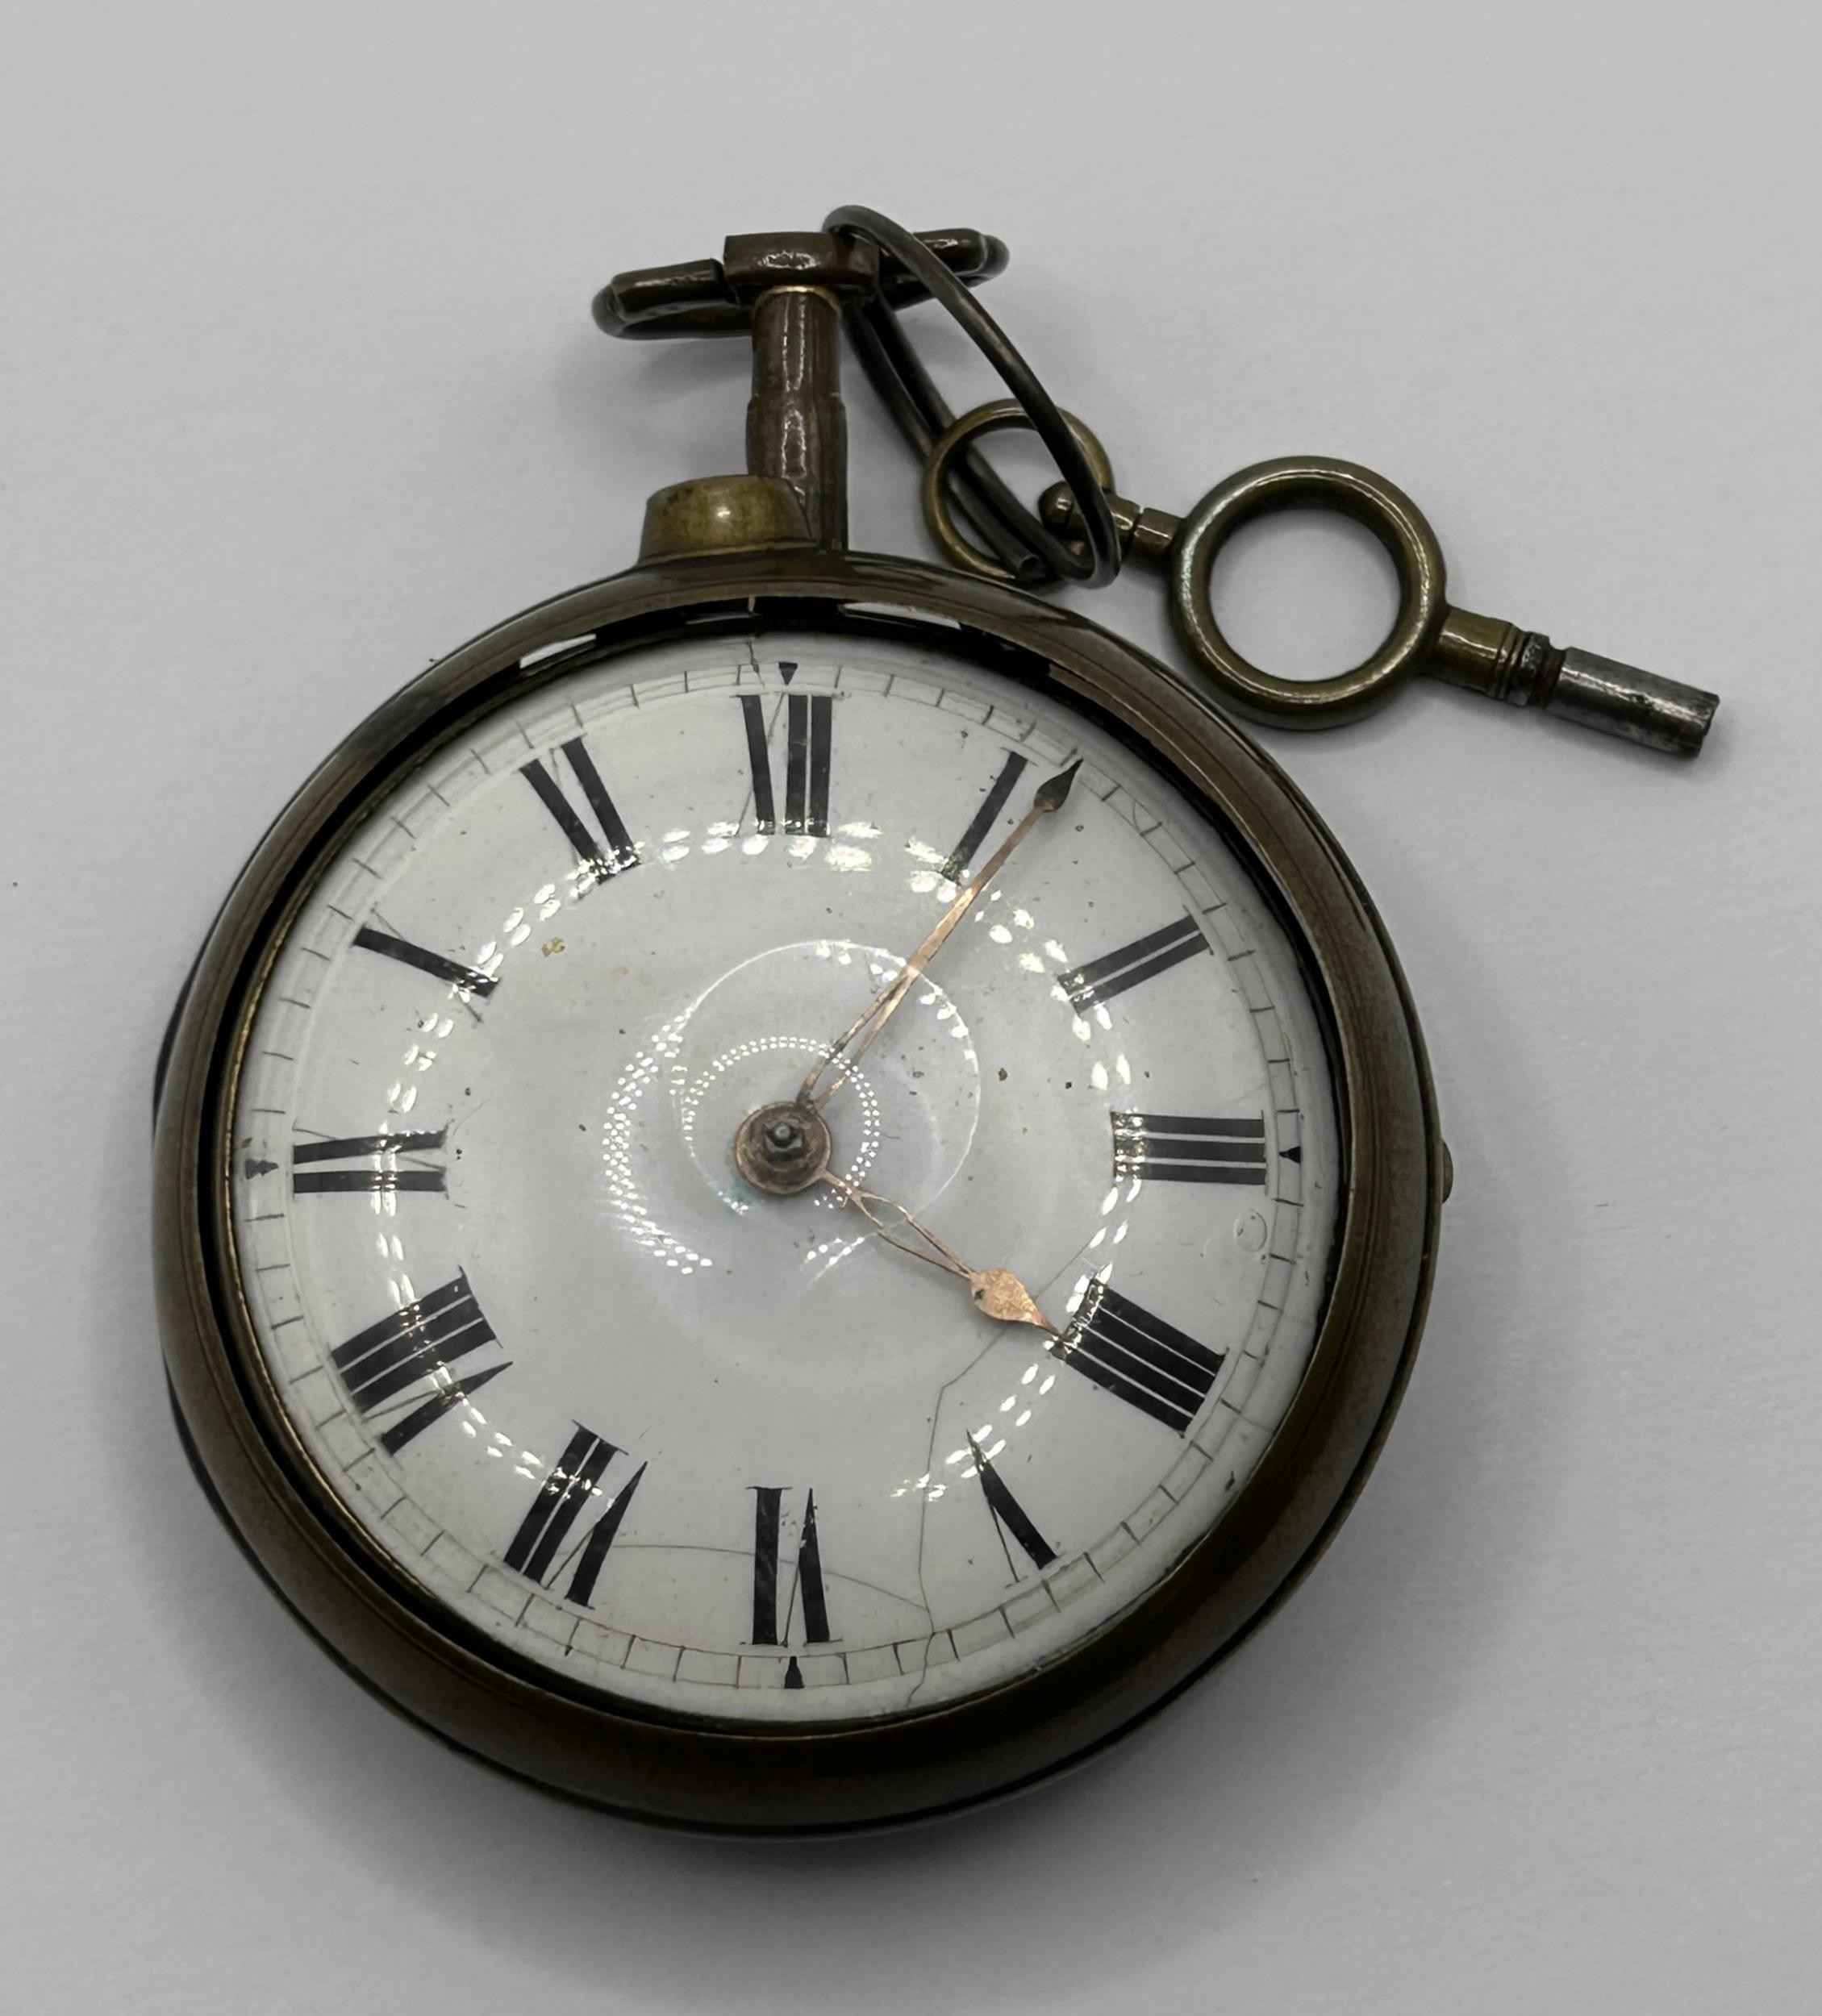 An 18th century pair cased pocket watch, the enamel dial with Roman numerals, the movement signed